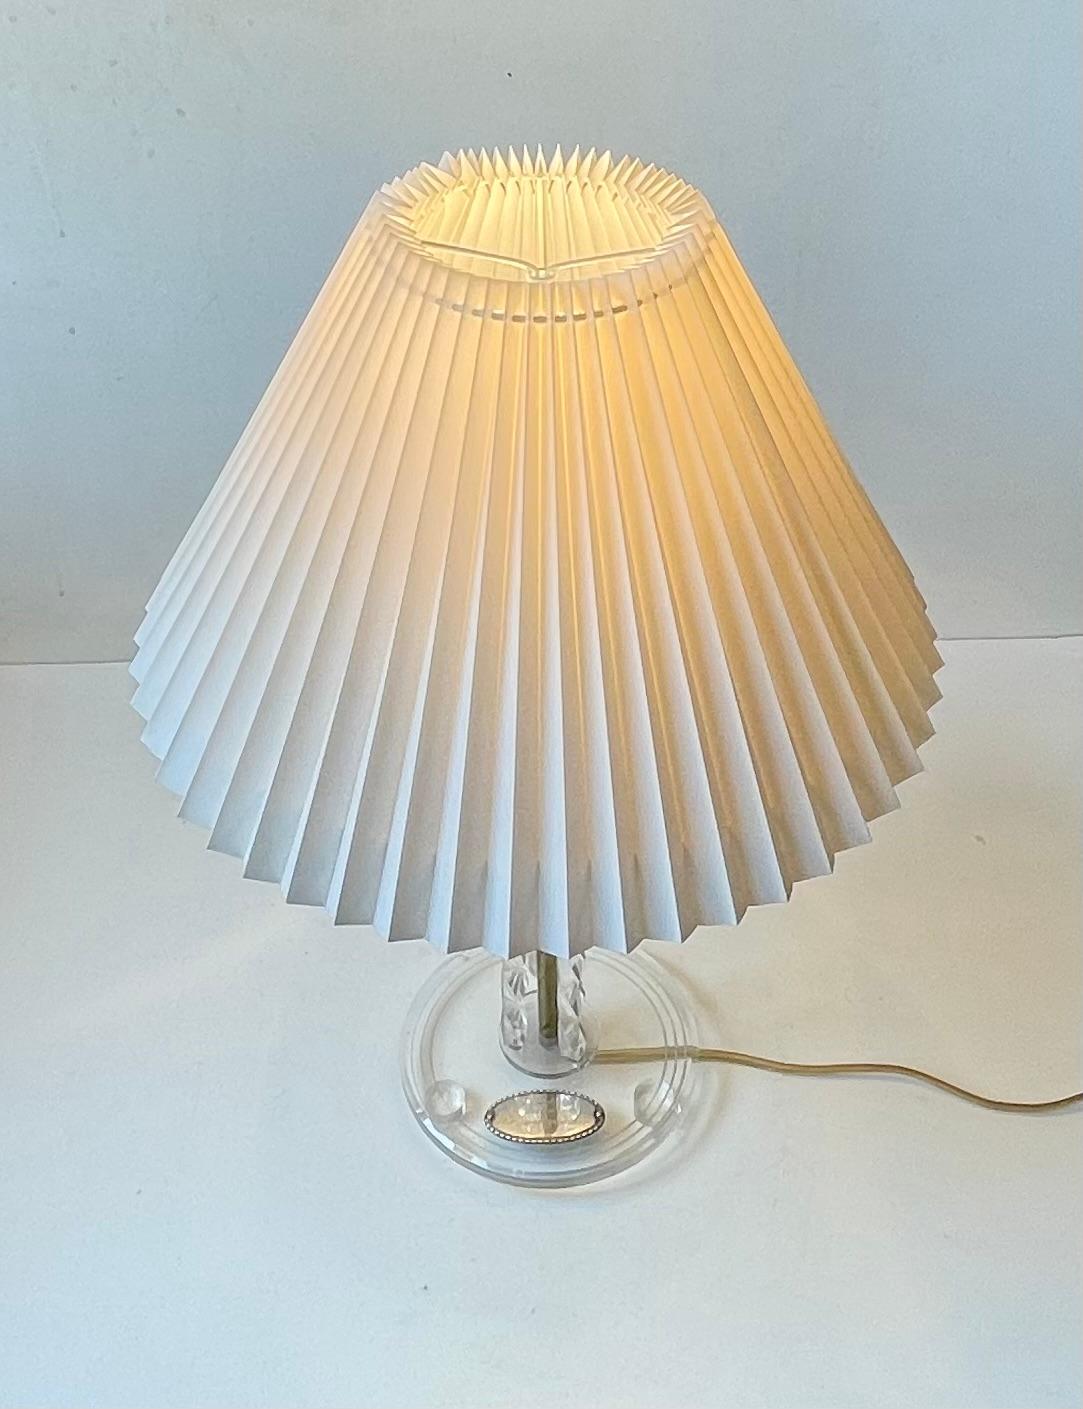 European Art Deco Style Table Lamp in Twisted Lucite and Brass, 1950s For Sale